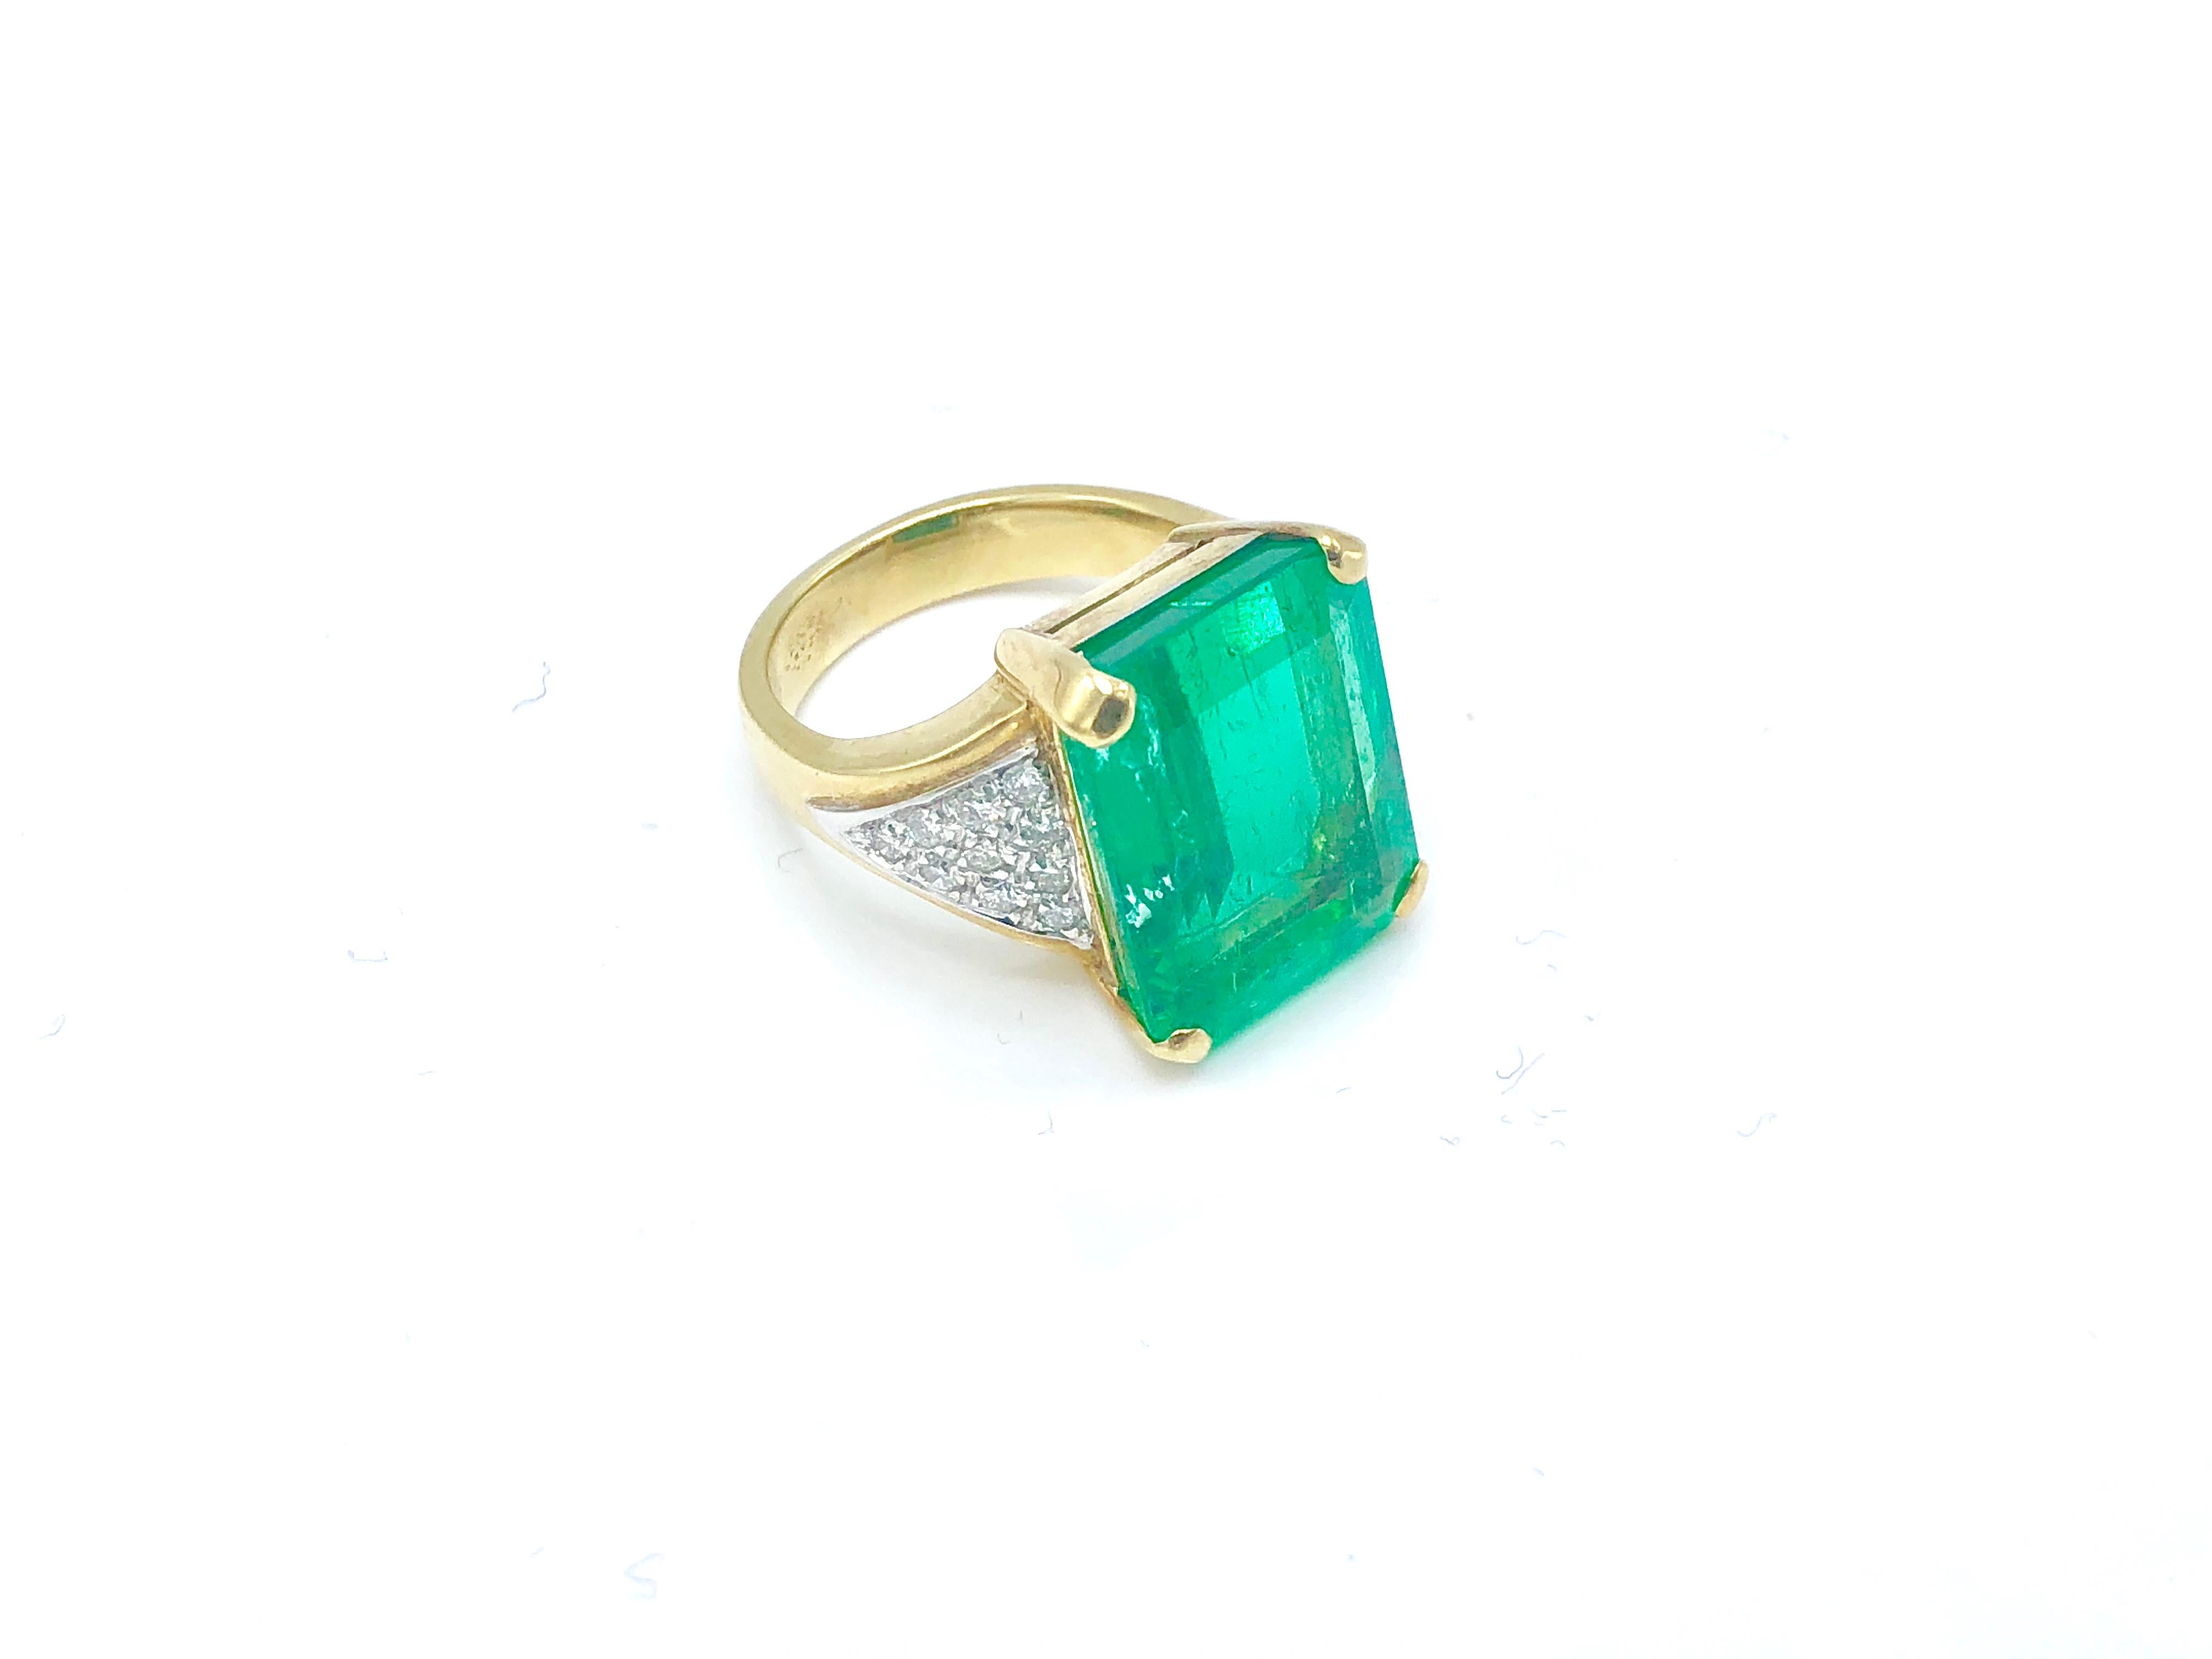 A stunning ring set with a 11 ct emerald 